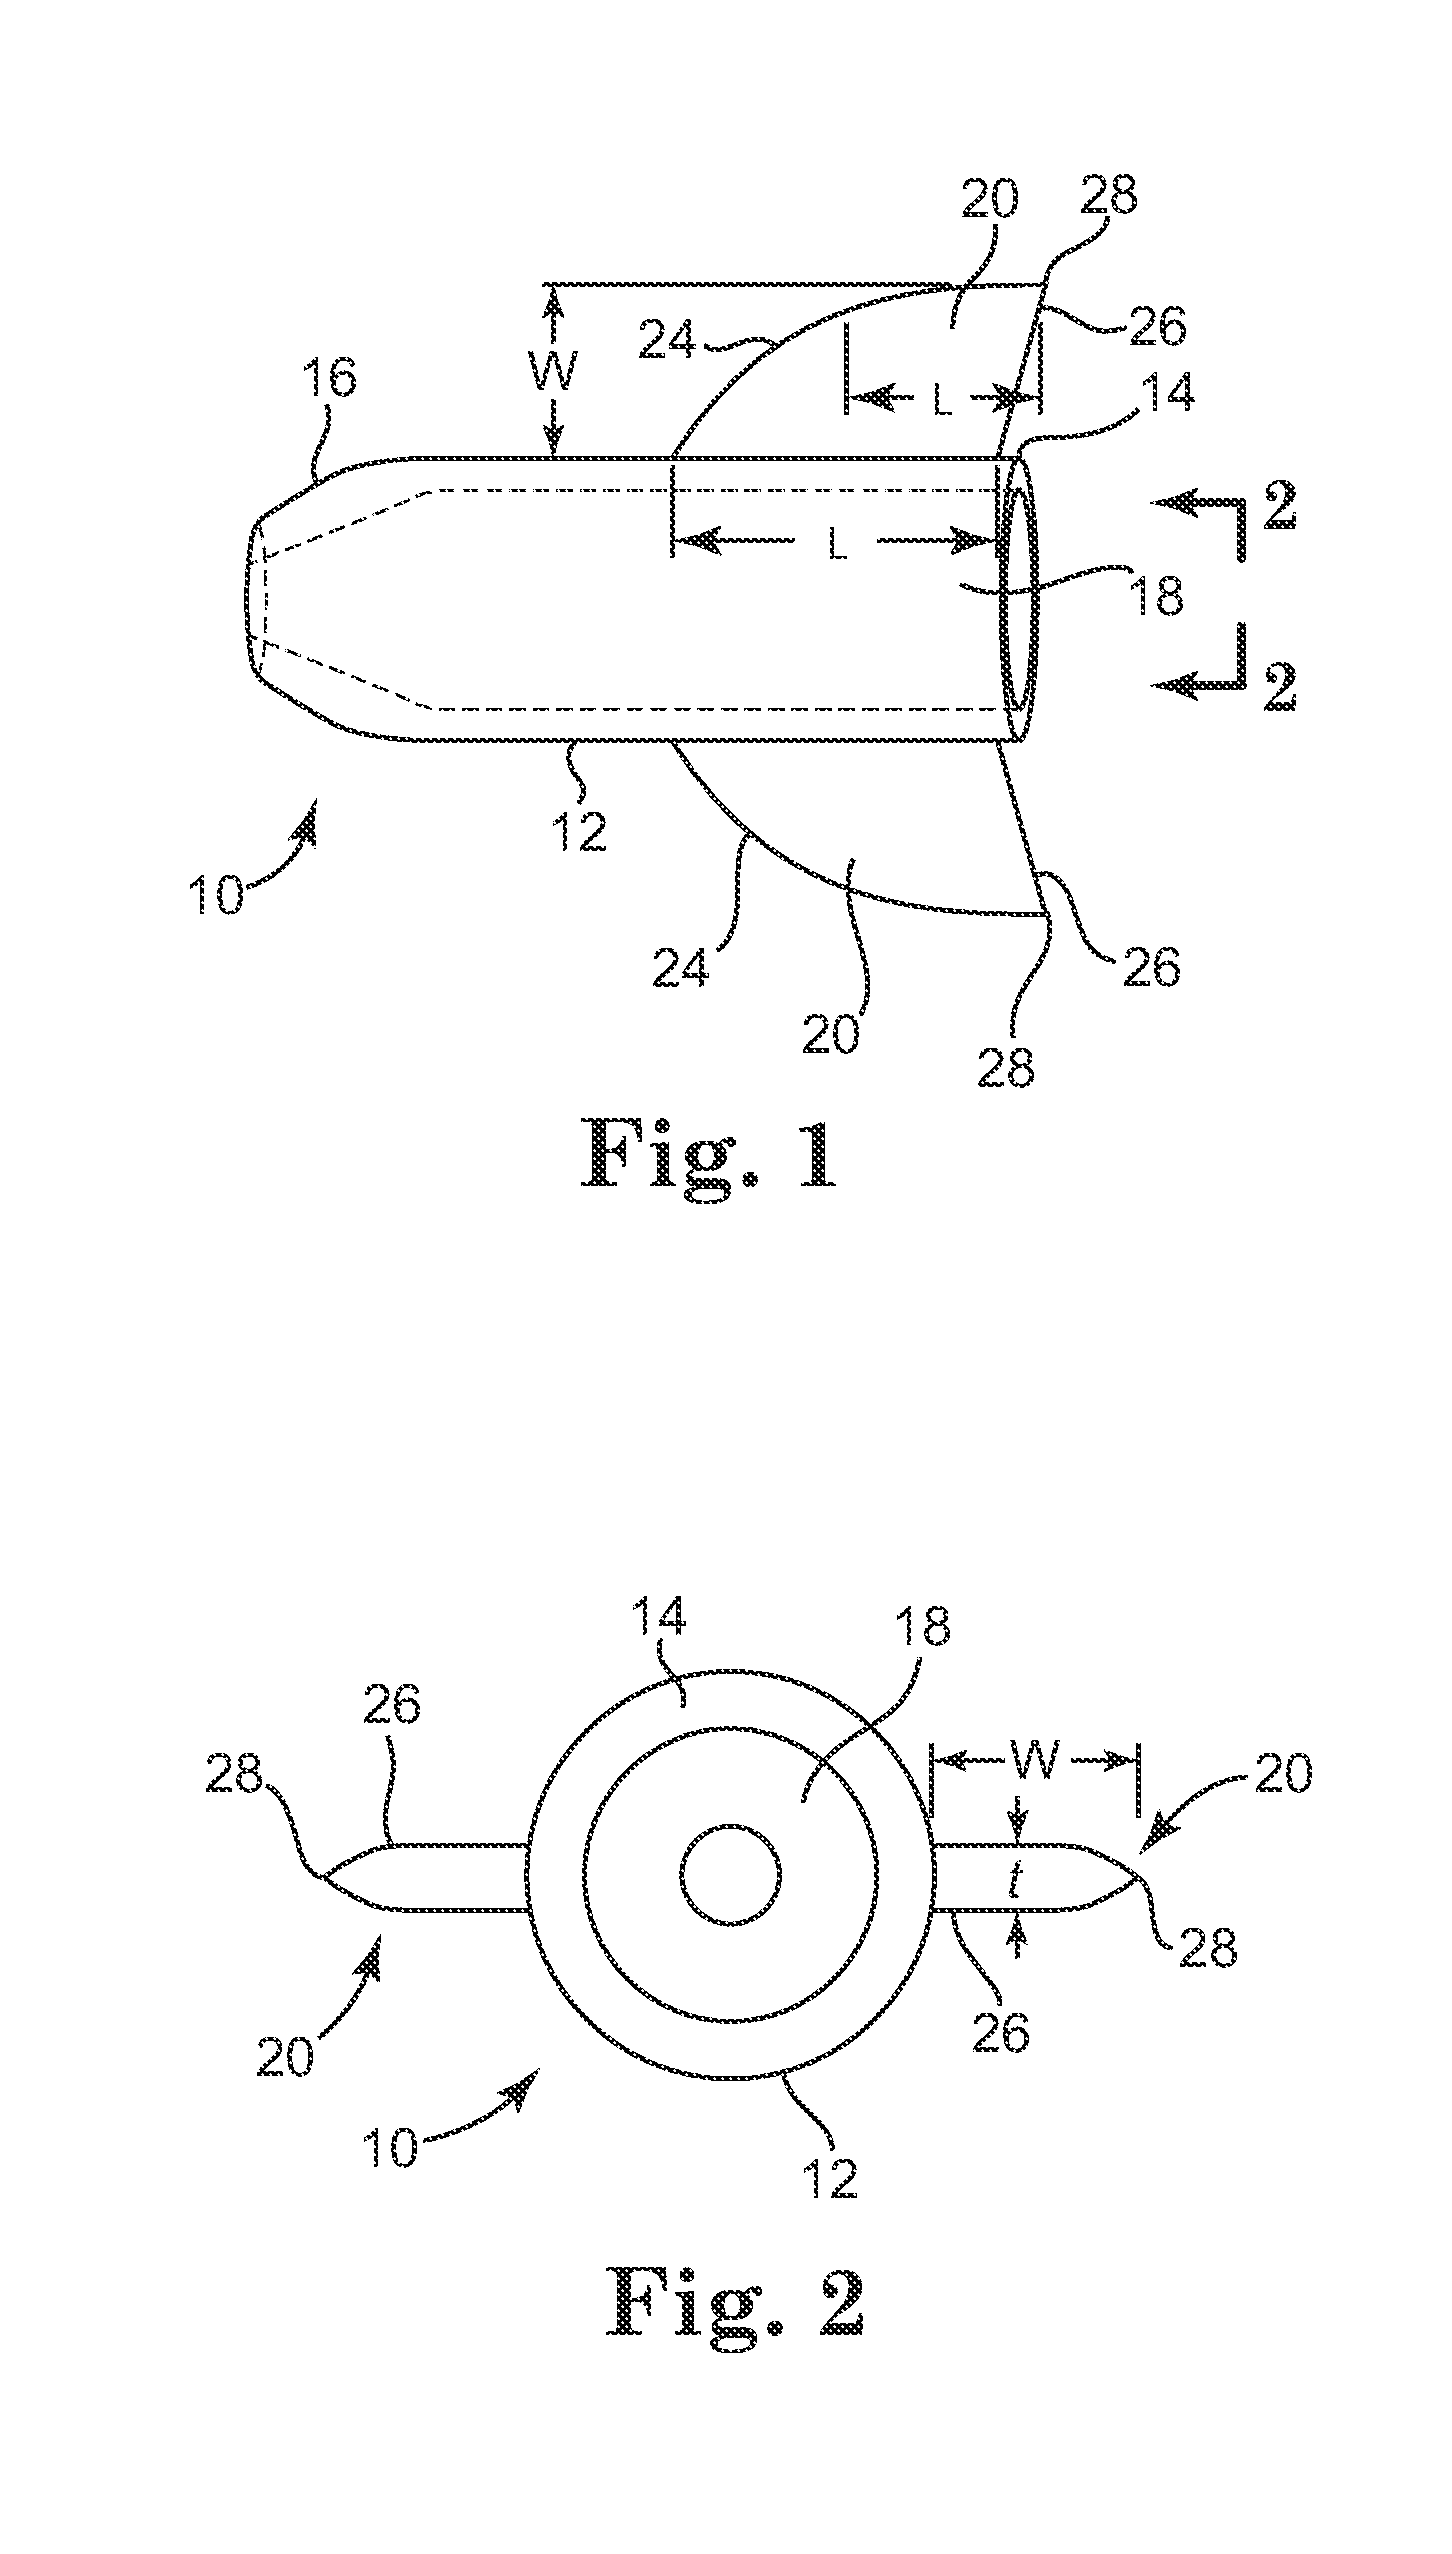 Surgical Articles and Methods for Treating Pelvic Conditions